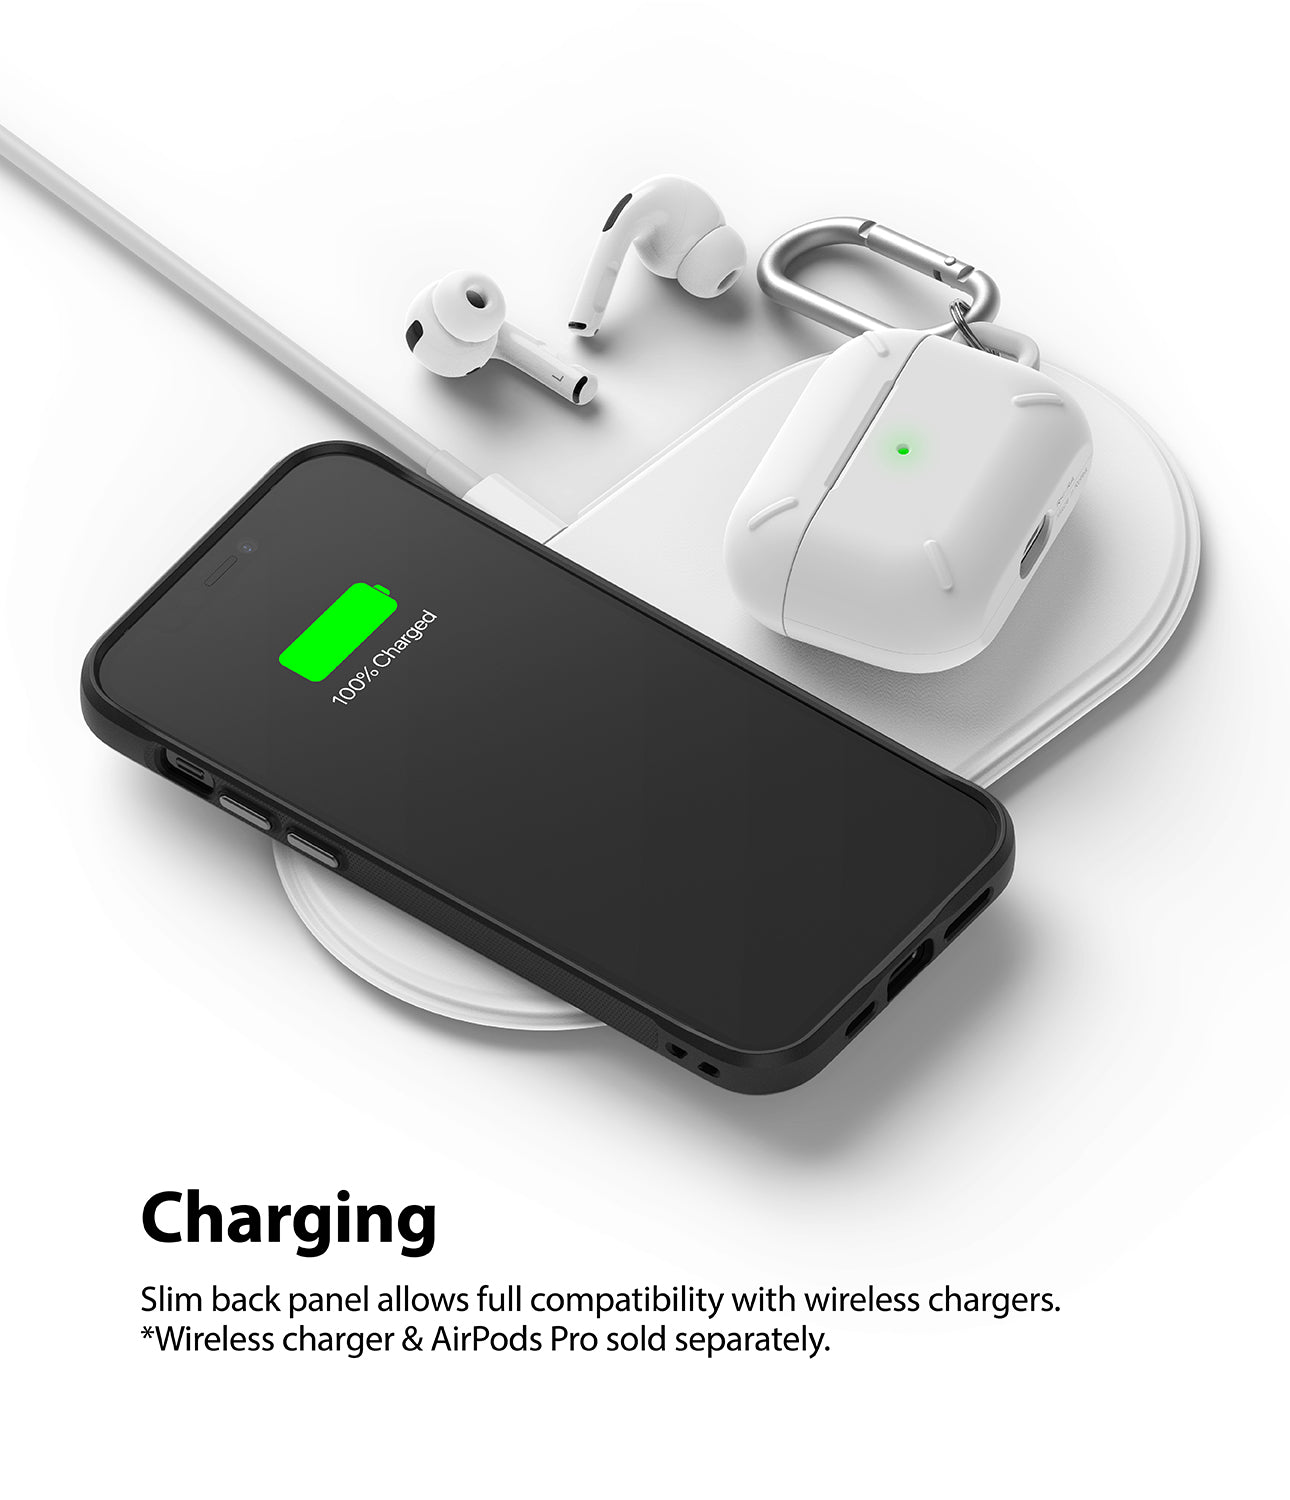 slim back panel allows for compatibility with wireless charging and magsafe